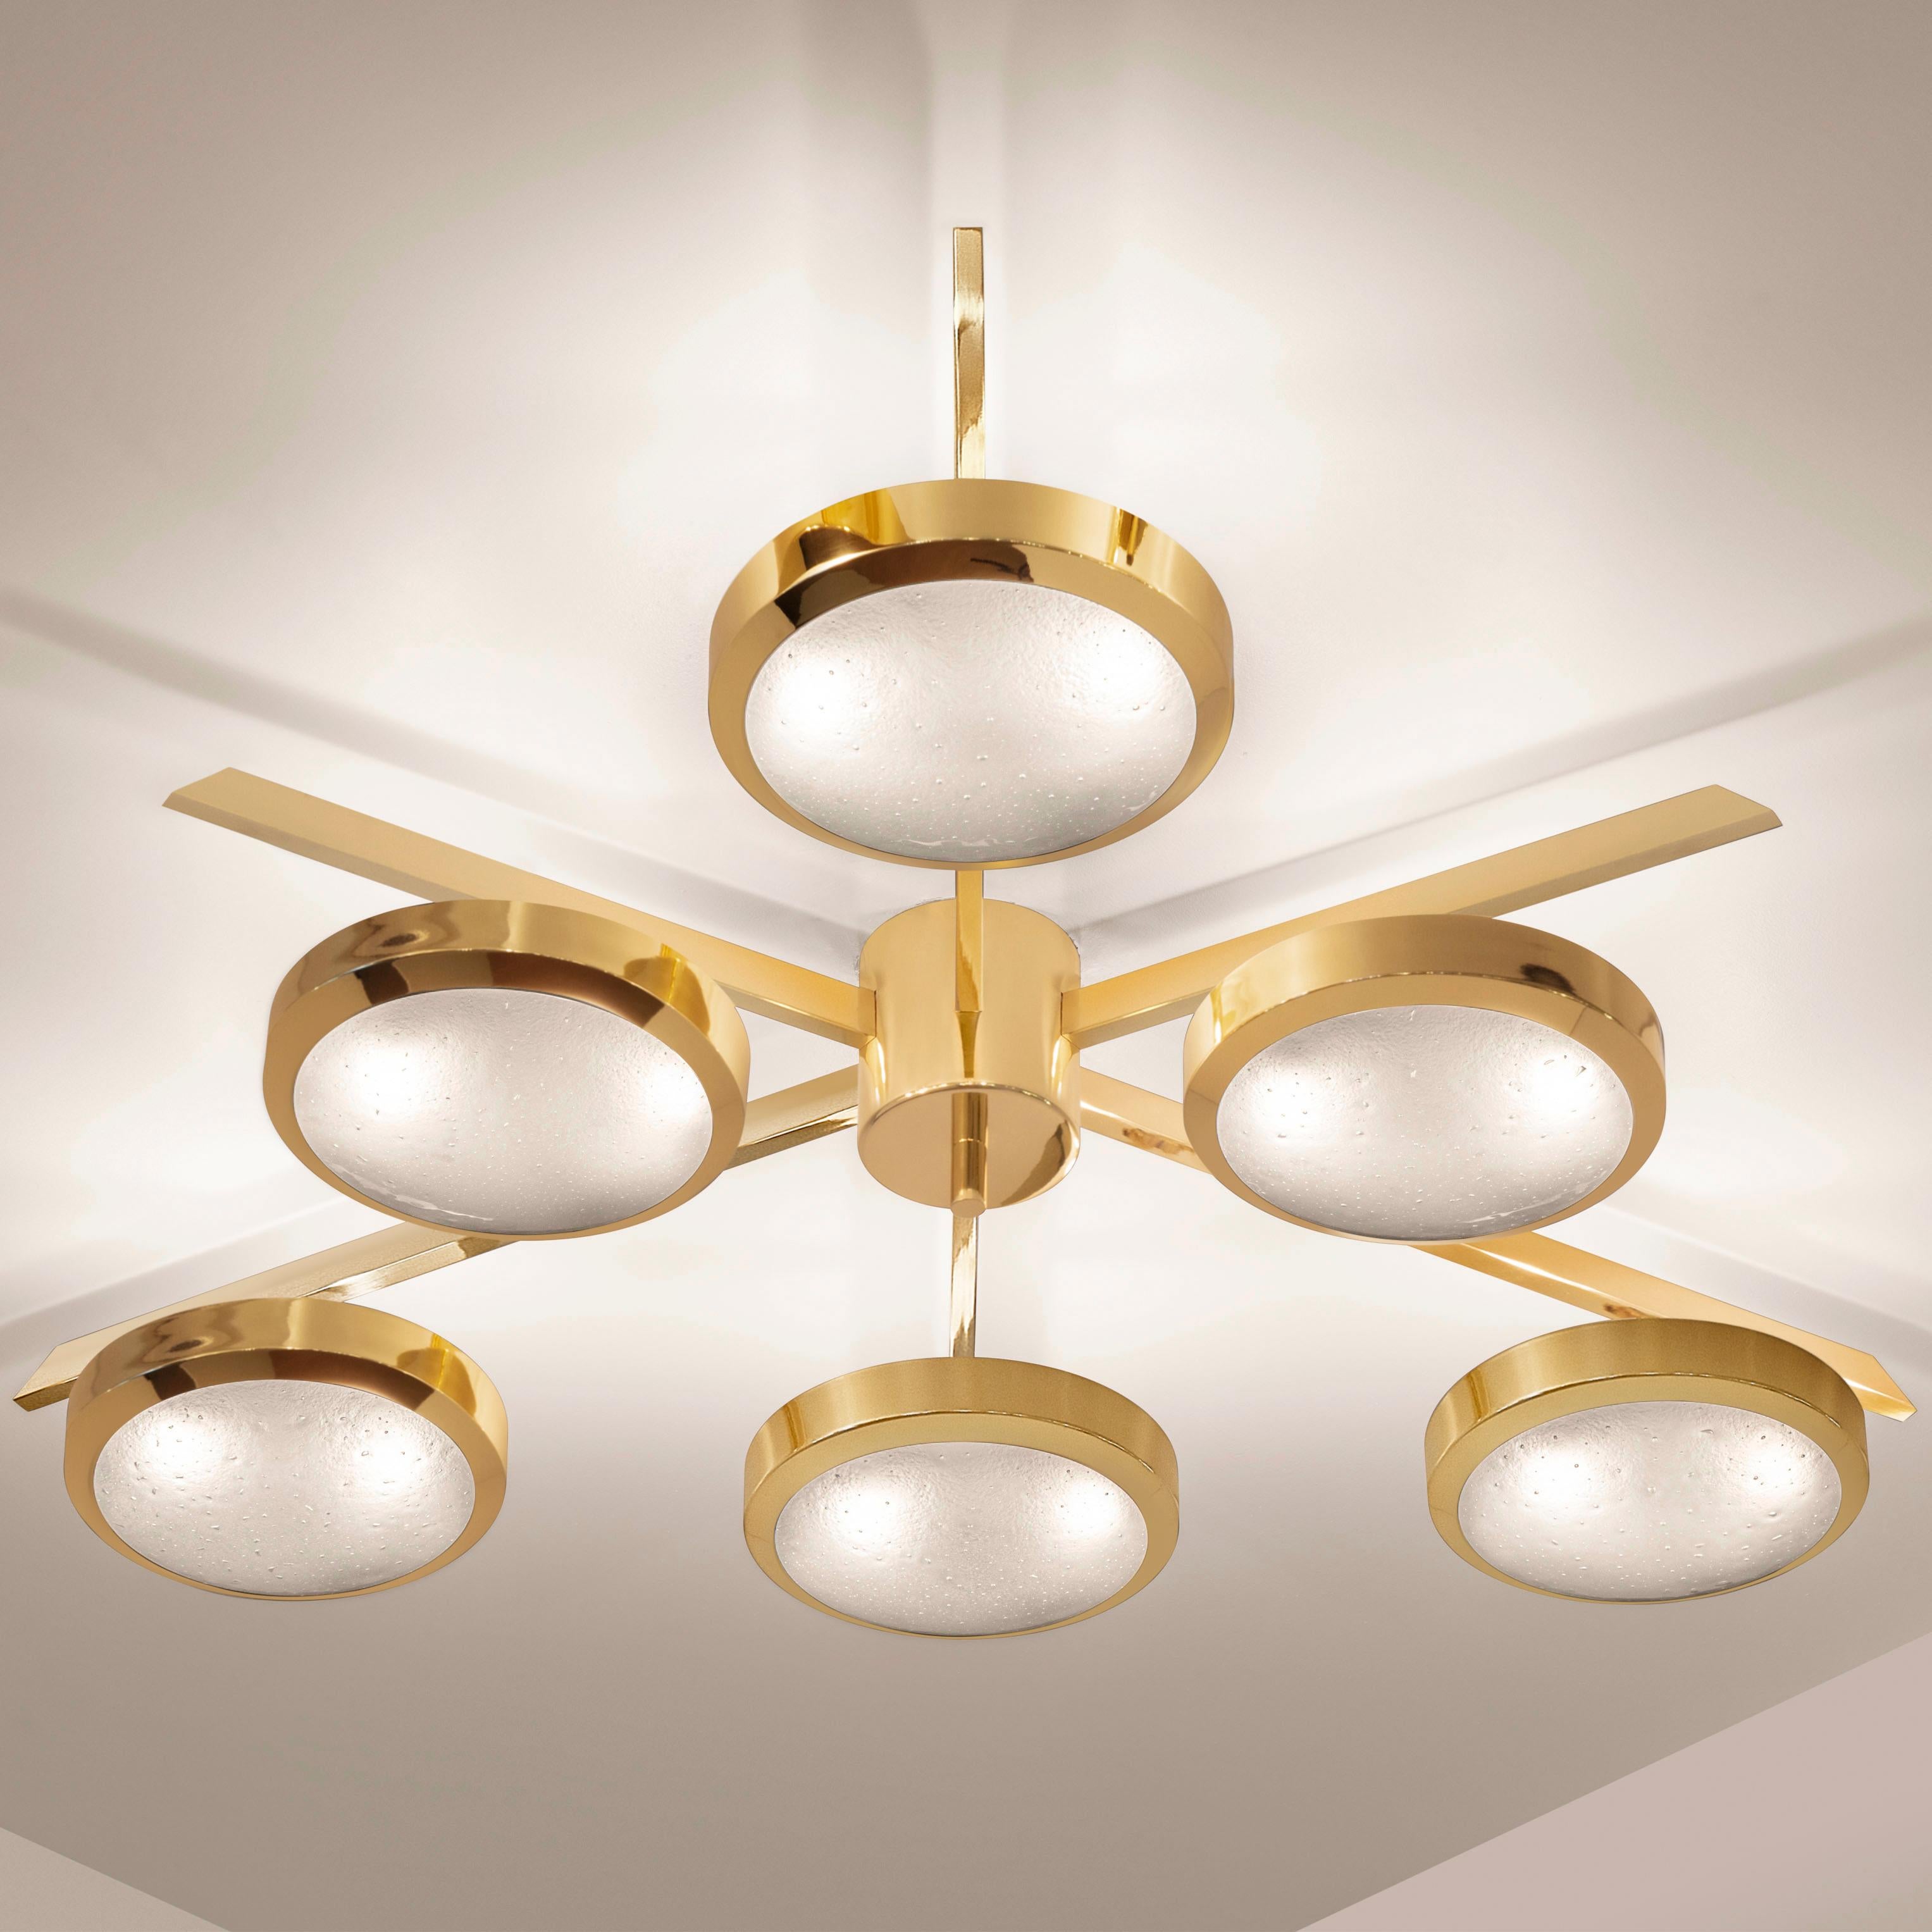 The Sei ceiling light is characterized by its star shaped frame with six suspended Murano glass shades. The first images show the fixture in our polished brass finish-subsequent pictures show it in a selection of alternative finishes. Starts at